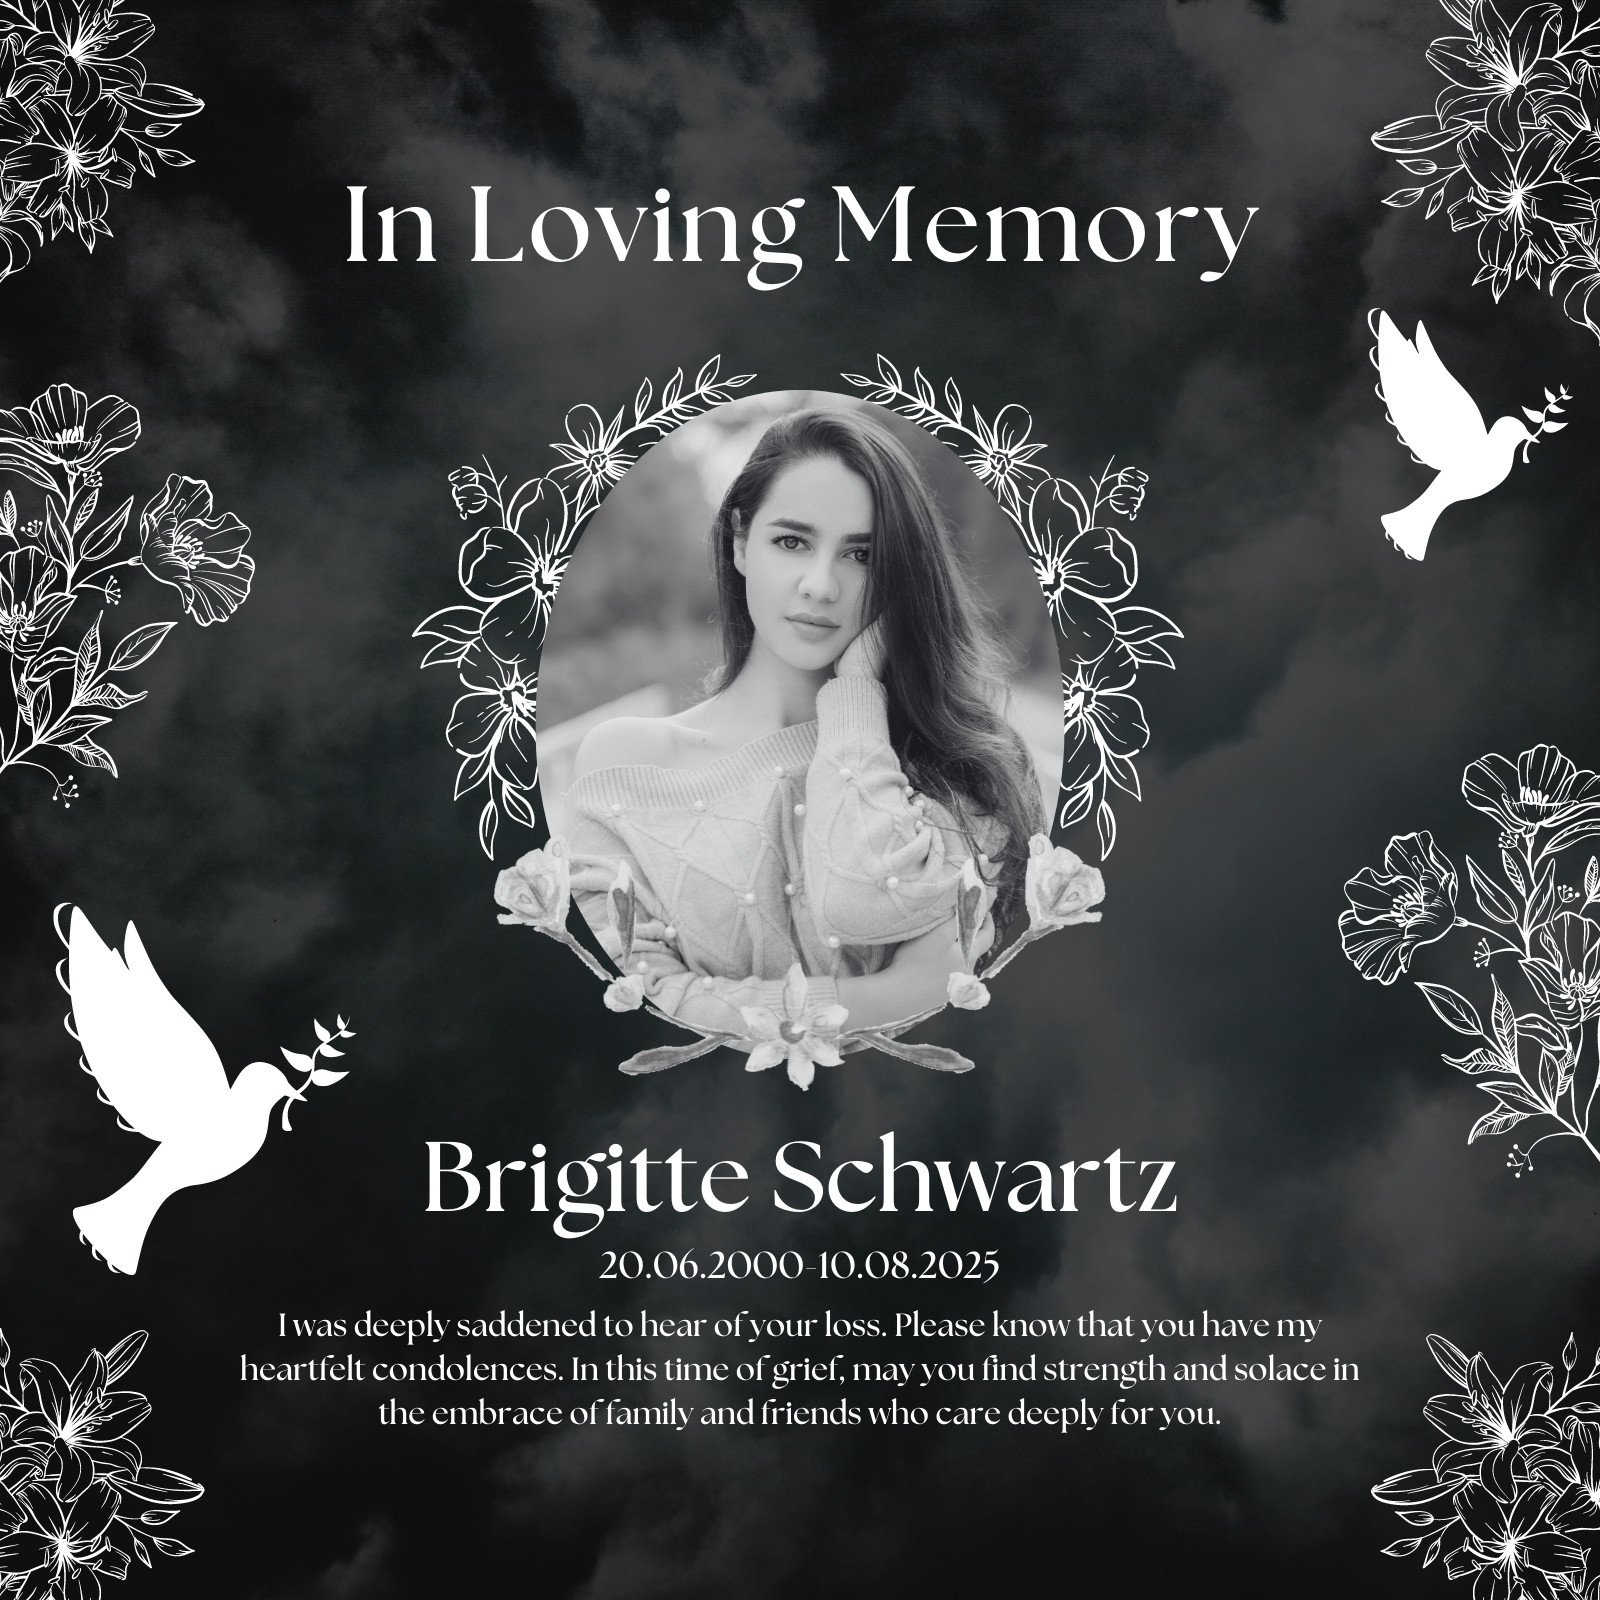 in loving memory images for facebook